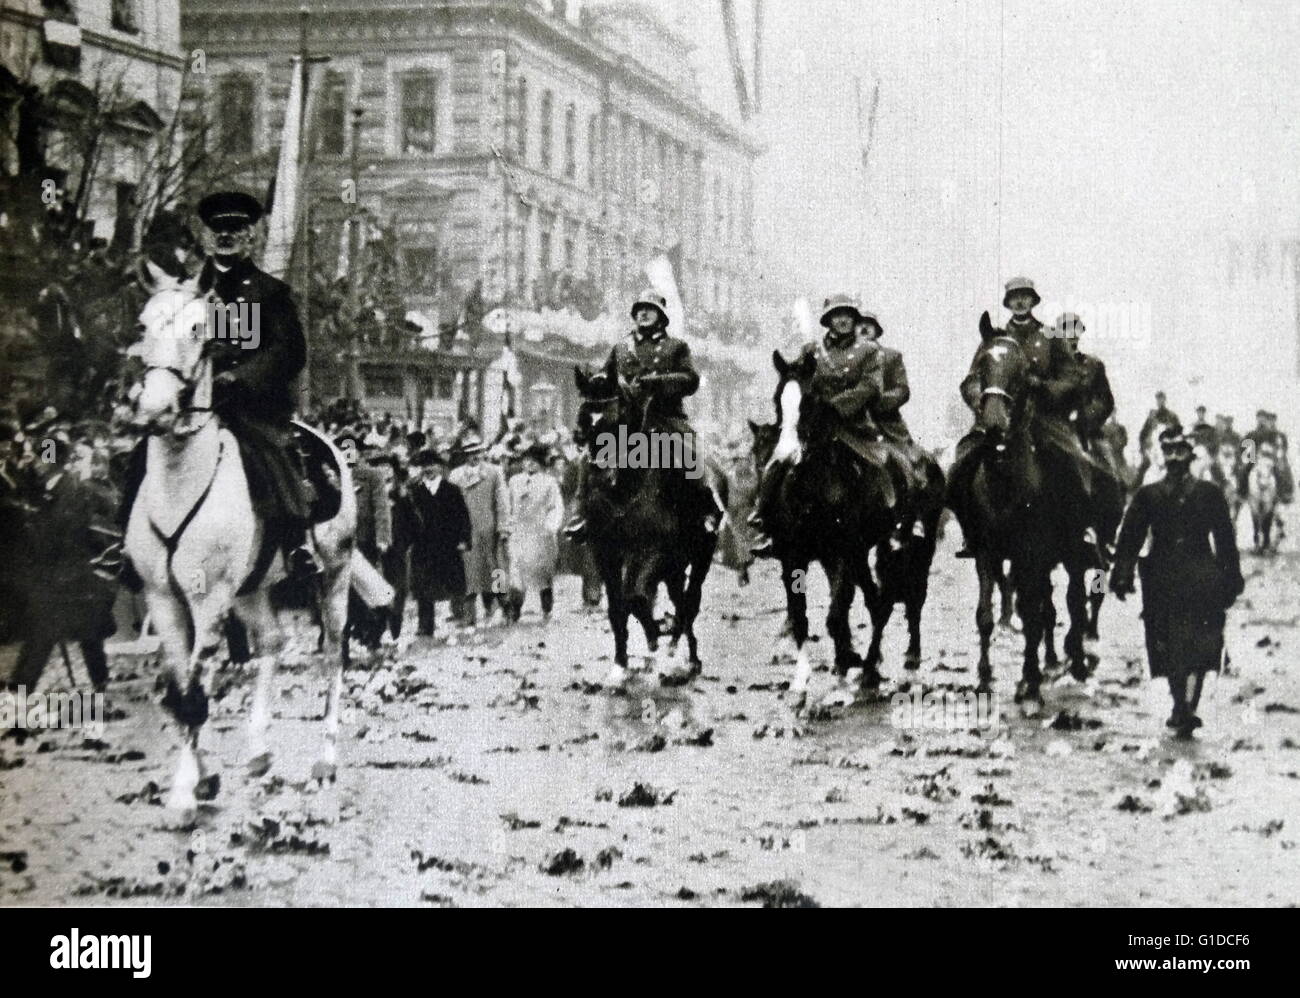 Photographic print of Miklós Horthy de Nagybánya (1868-1957) a Hungarian admiral and statesman, who served as Regent of the Kingdom of Hungary between World Wars I and II, riding horseback through streets. Dated 20th Century Stock Photo